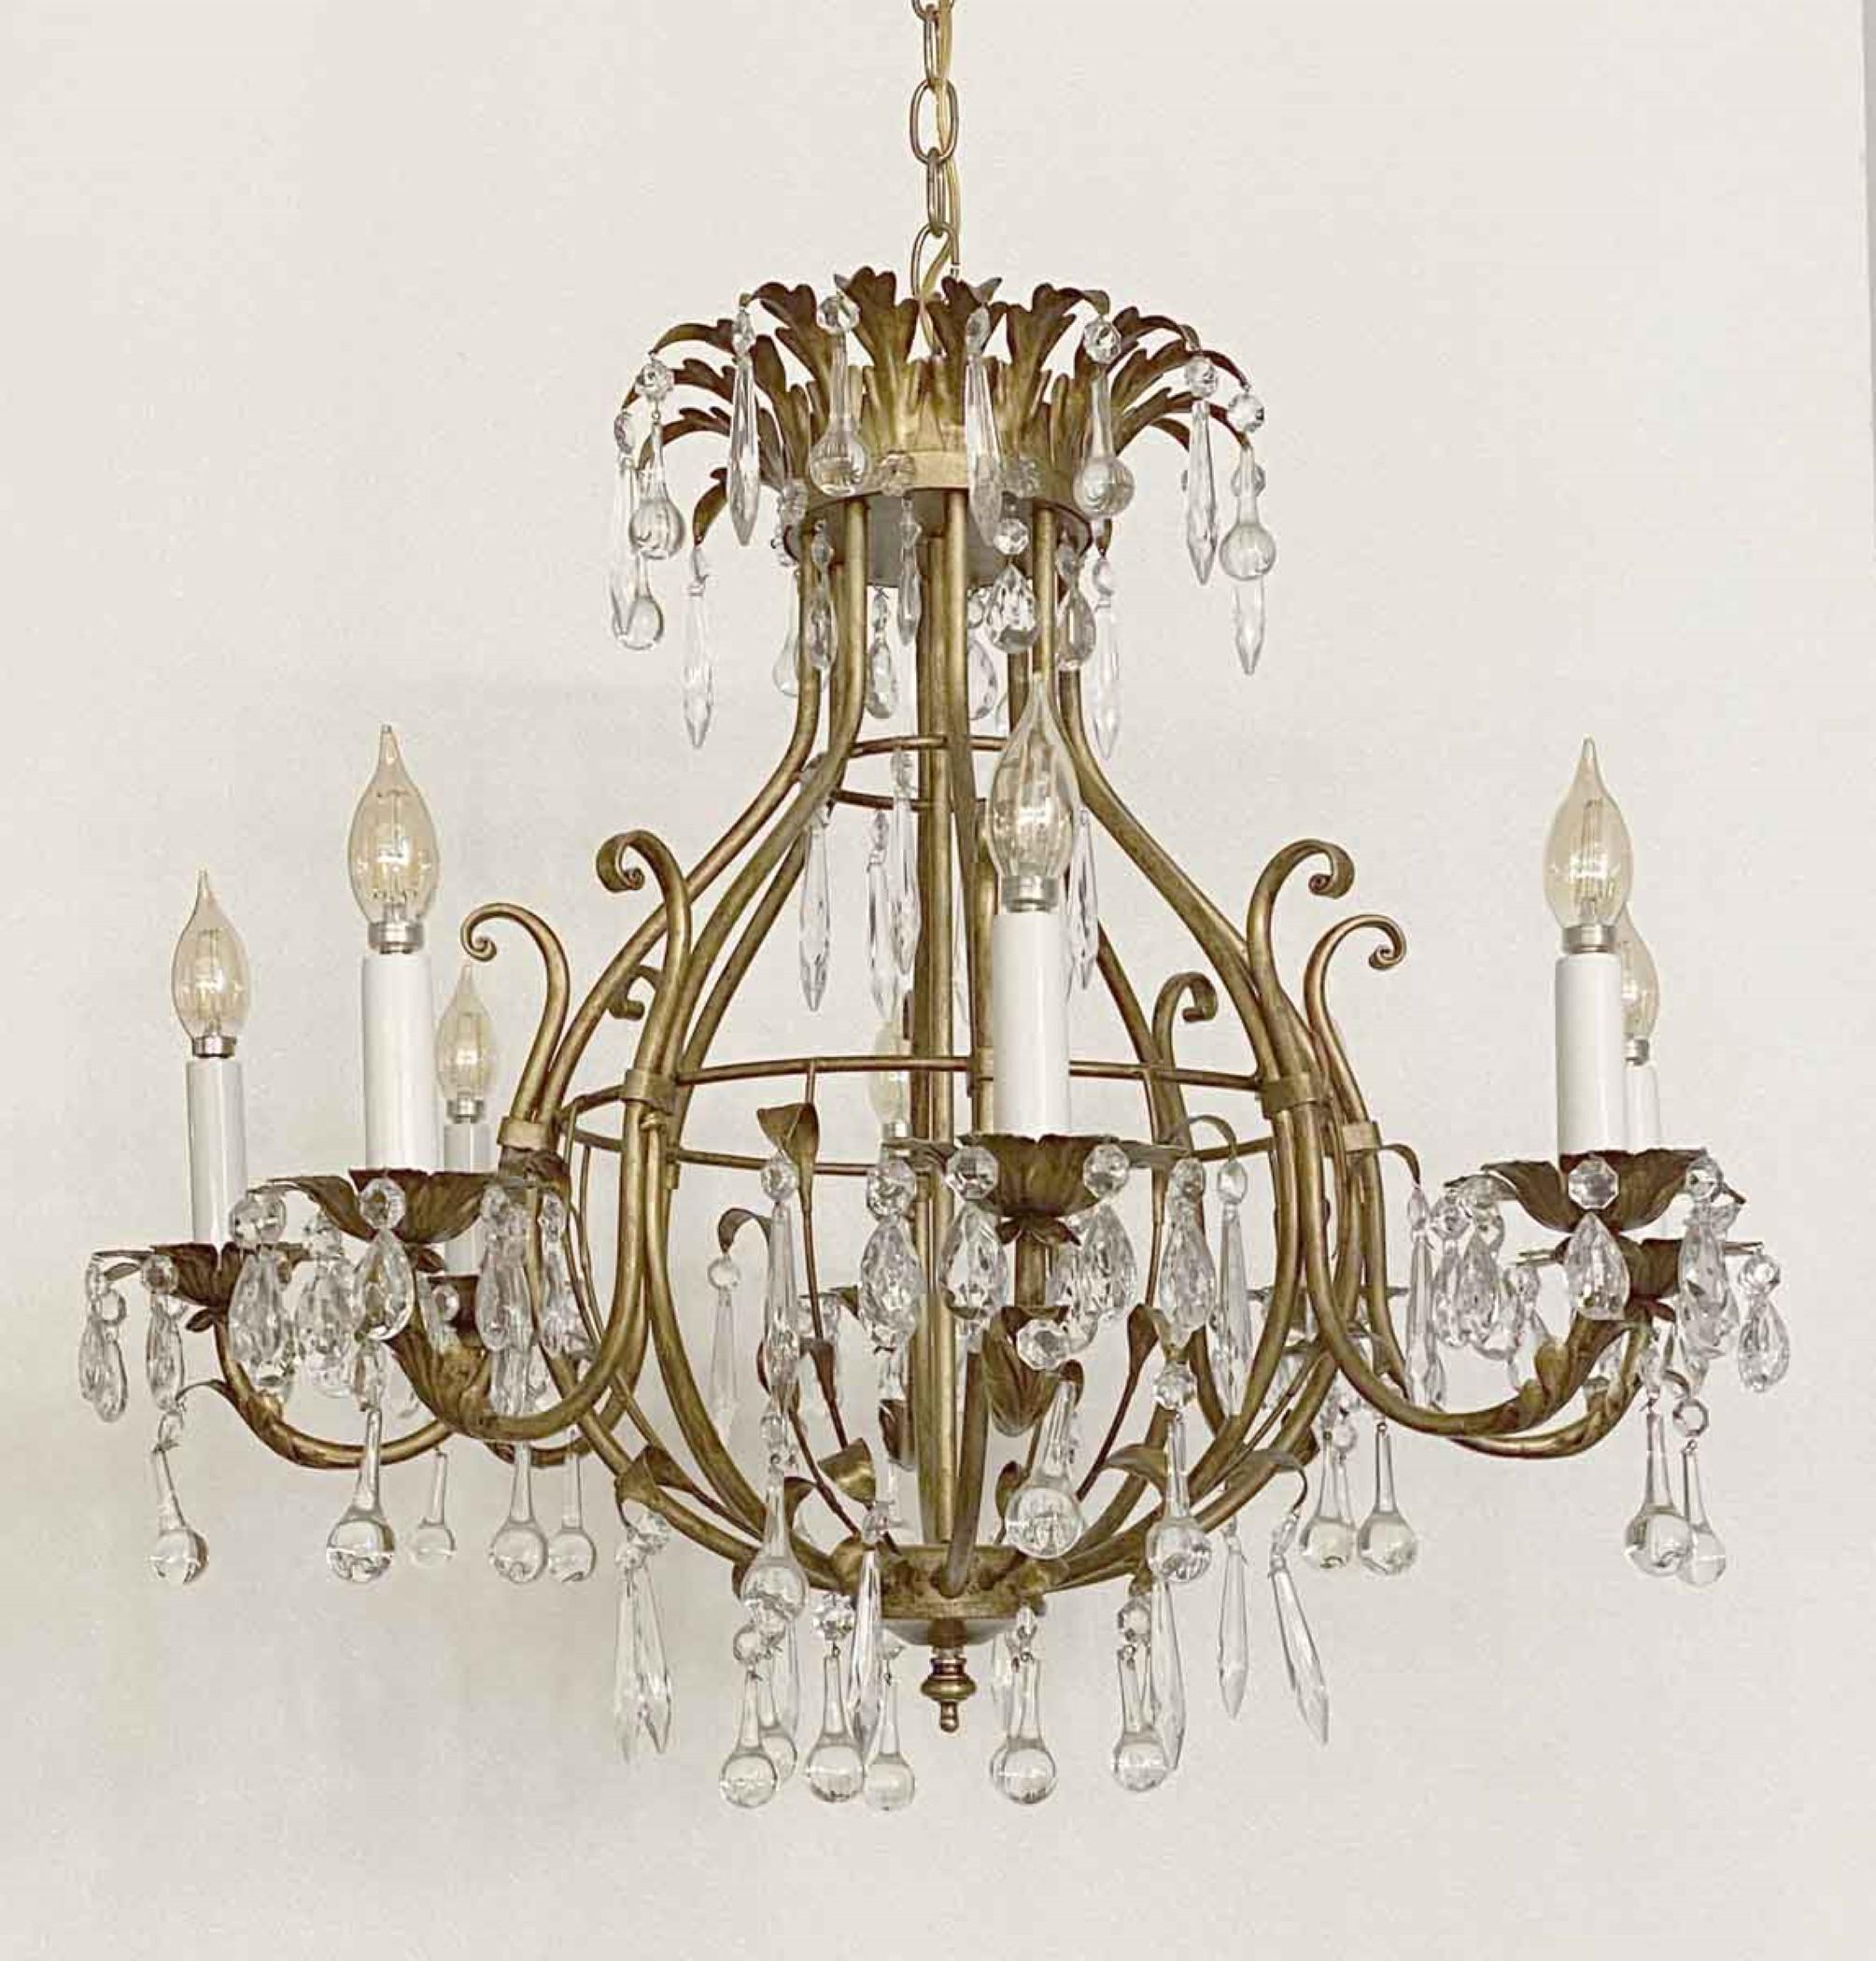 1980s Teardrop Crystal Chandelier w Gilt in Florentine Style In Good Condition For Sale In New York, NY